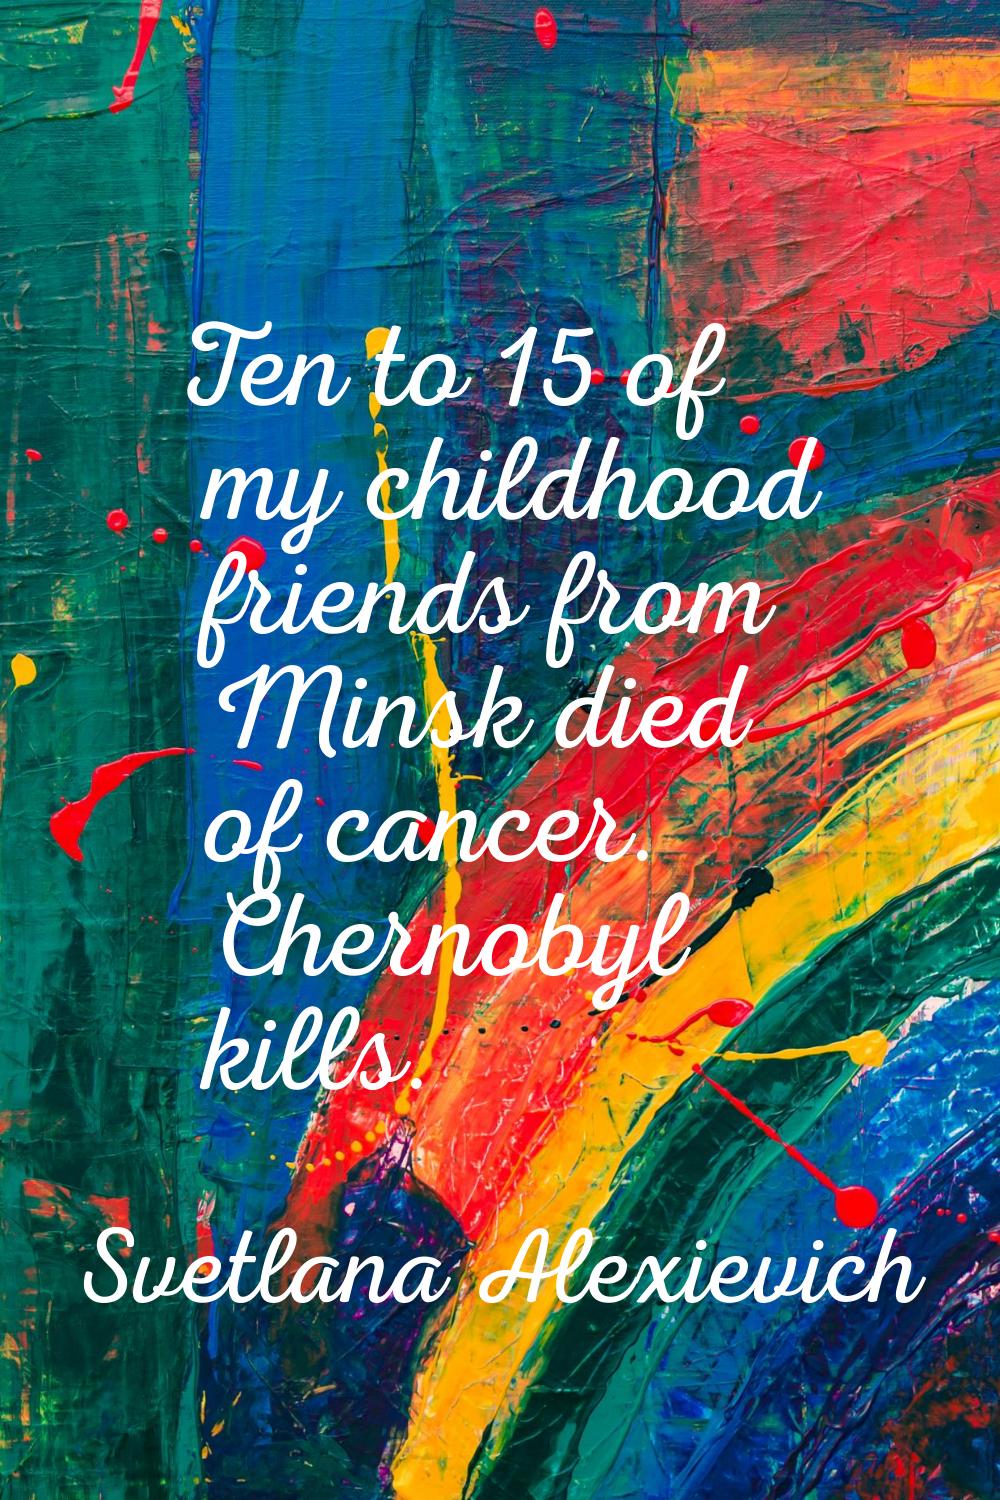 Ten to 15 of my childhood friends from Minsk died of cancer. Chernobyl kills.